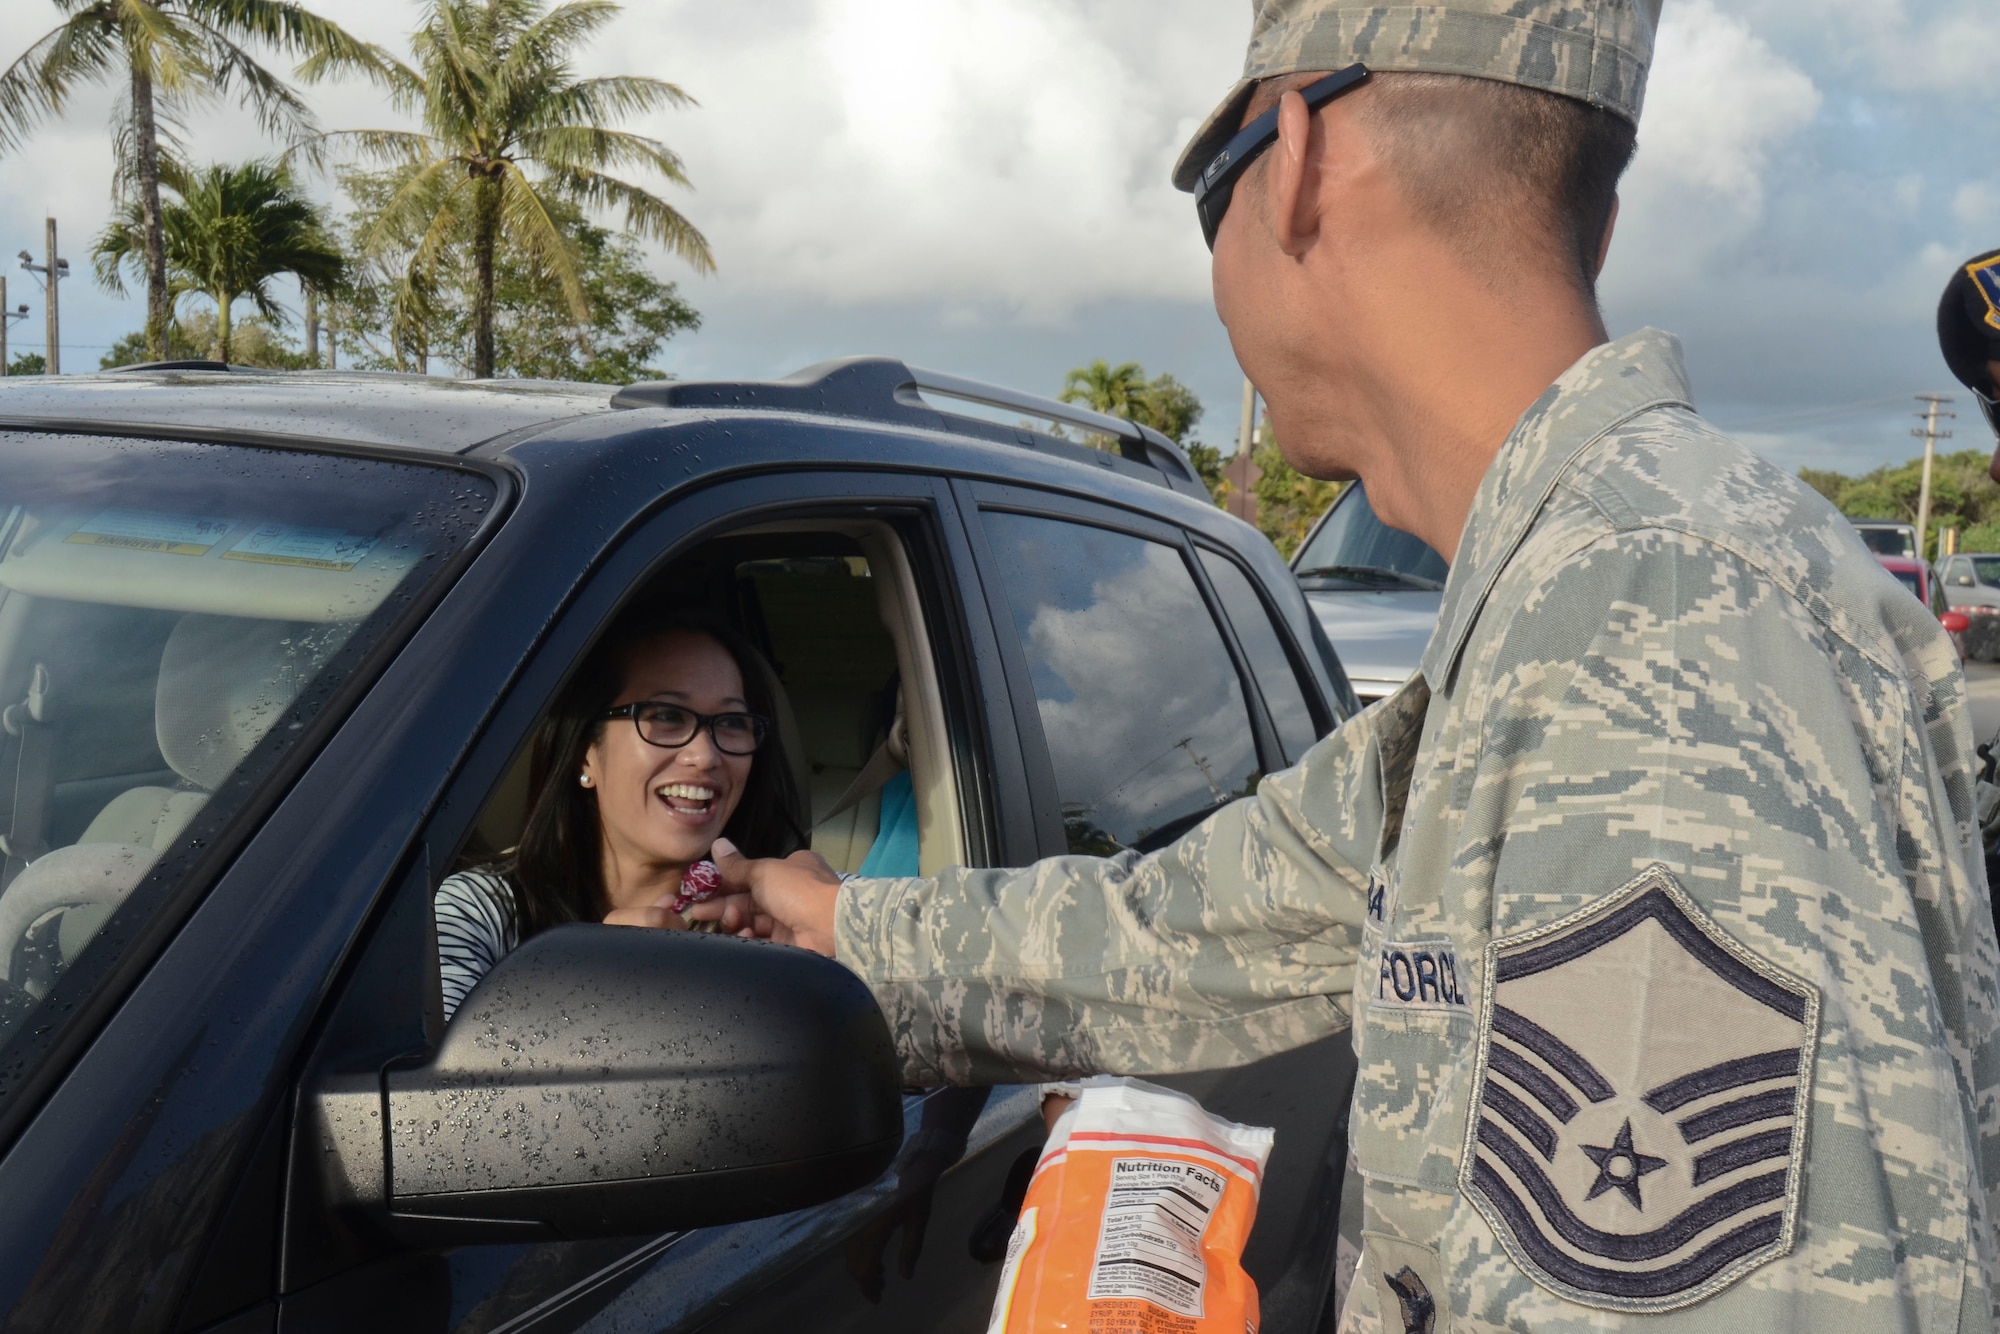 Master Sgt. Bradley Dapilmoto, 36th Wing Staff Agency first sergeant, hands a piece of candy to a driver entering Andersen Air Force Base, Guam at the main gate May 22, 2014. Base senior leadership handed out candy advertising the Critical Days of Summer 2014 Theme "Risk:  Double Checks, Not Second Thoughts".  (U.S. Air Force photo by Airman 1st Class Emily A. Bradley/Released)